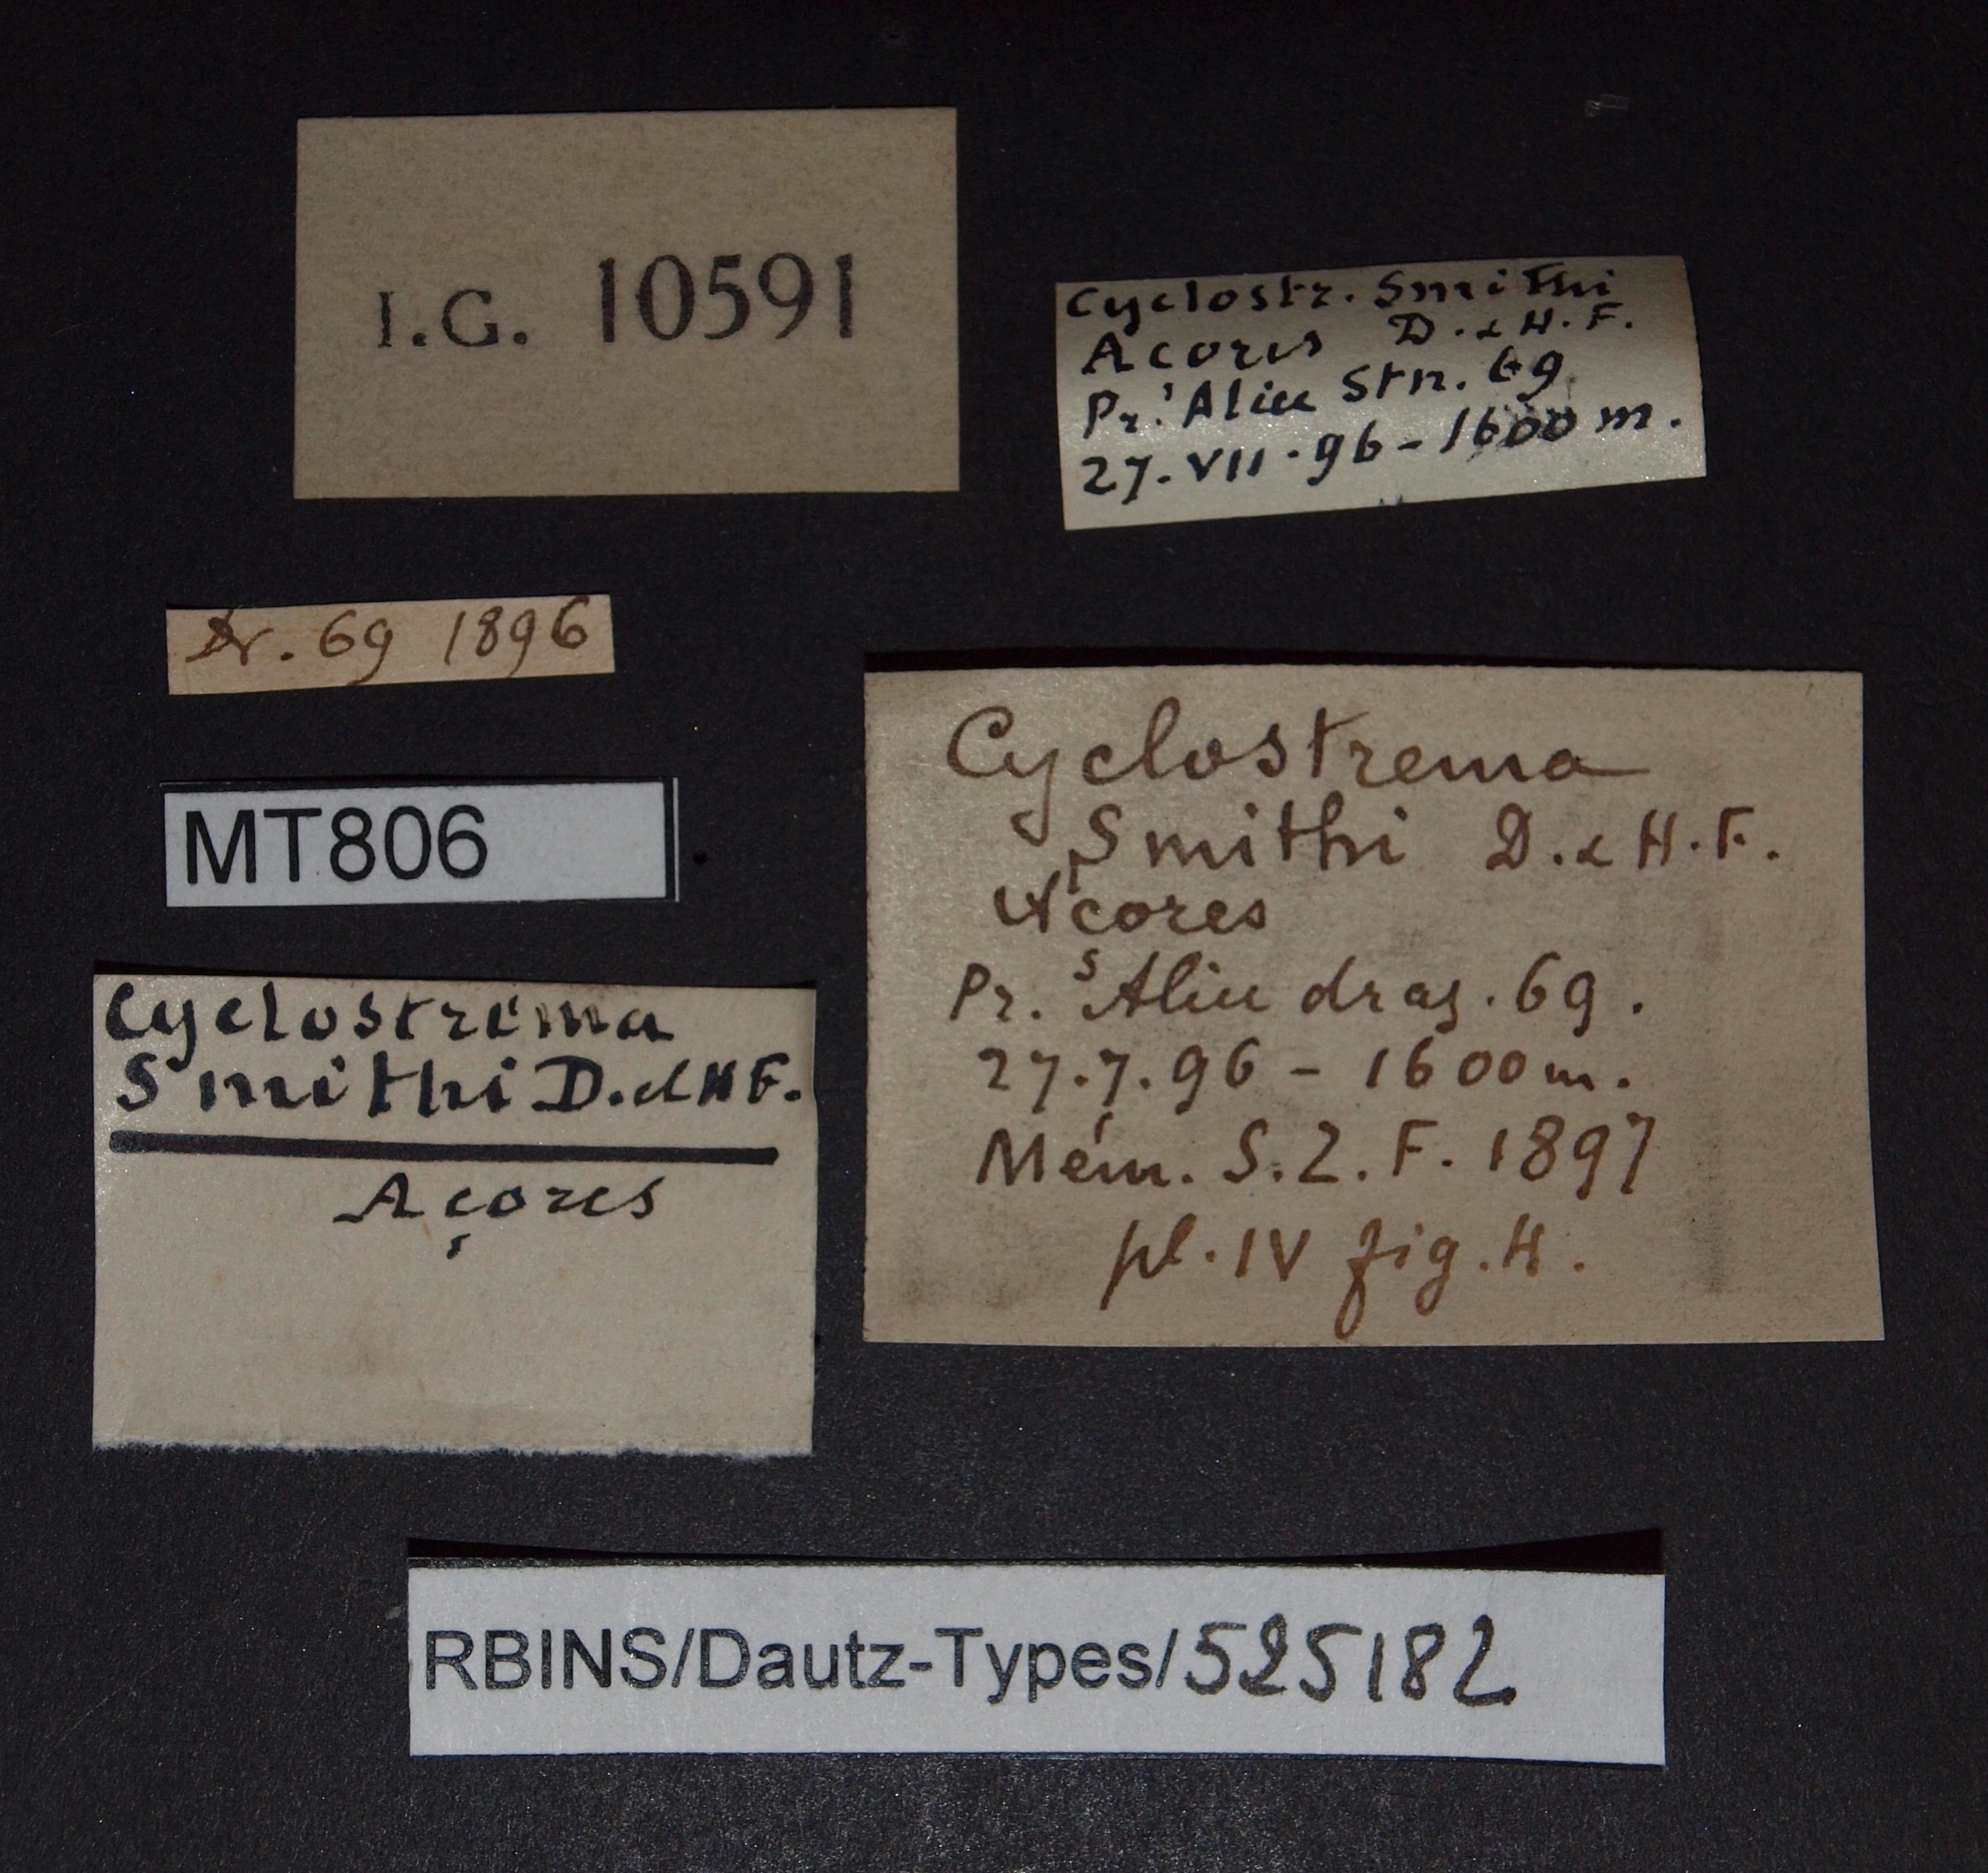 BE-RBINS-INV PARATYPE MT 807 Cyclostrema smithi LABELS.jpg